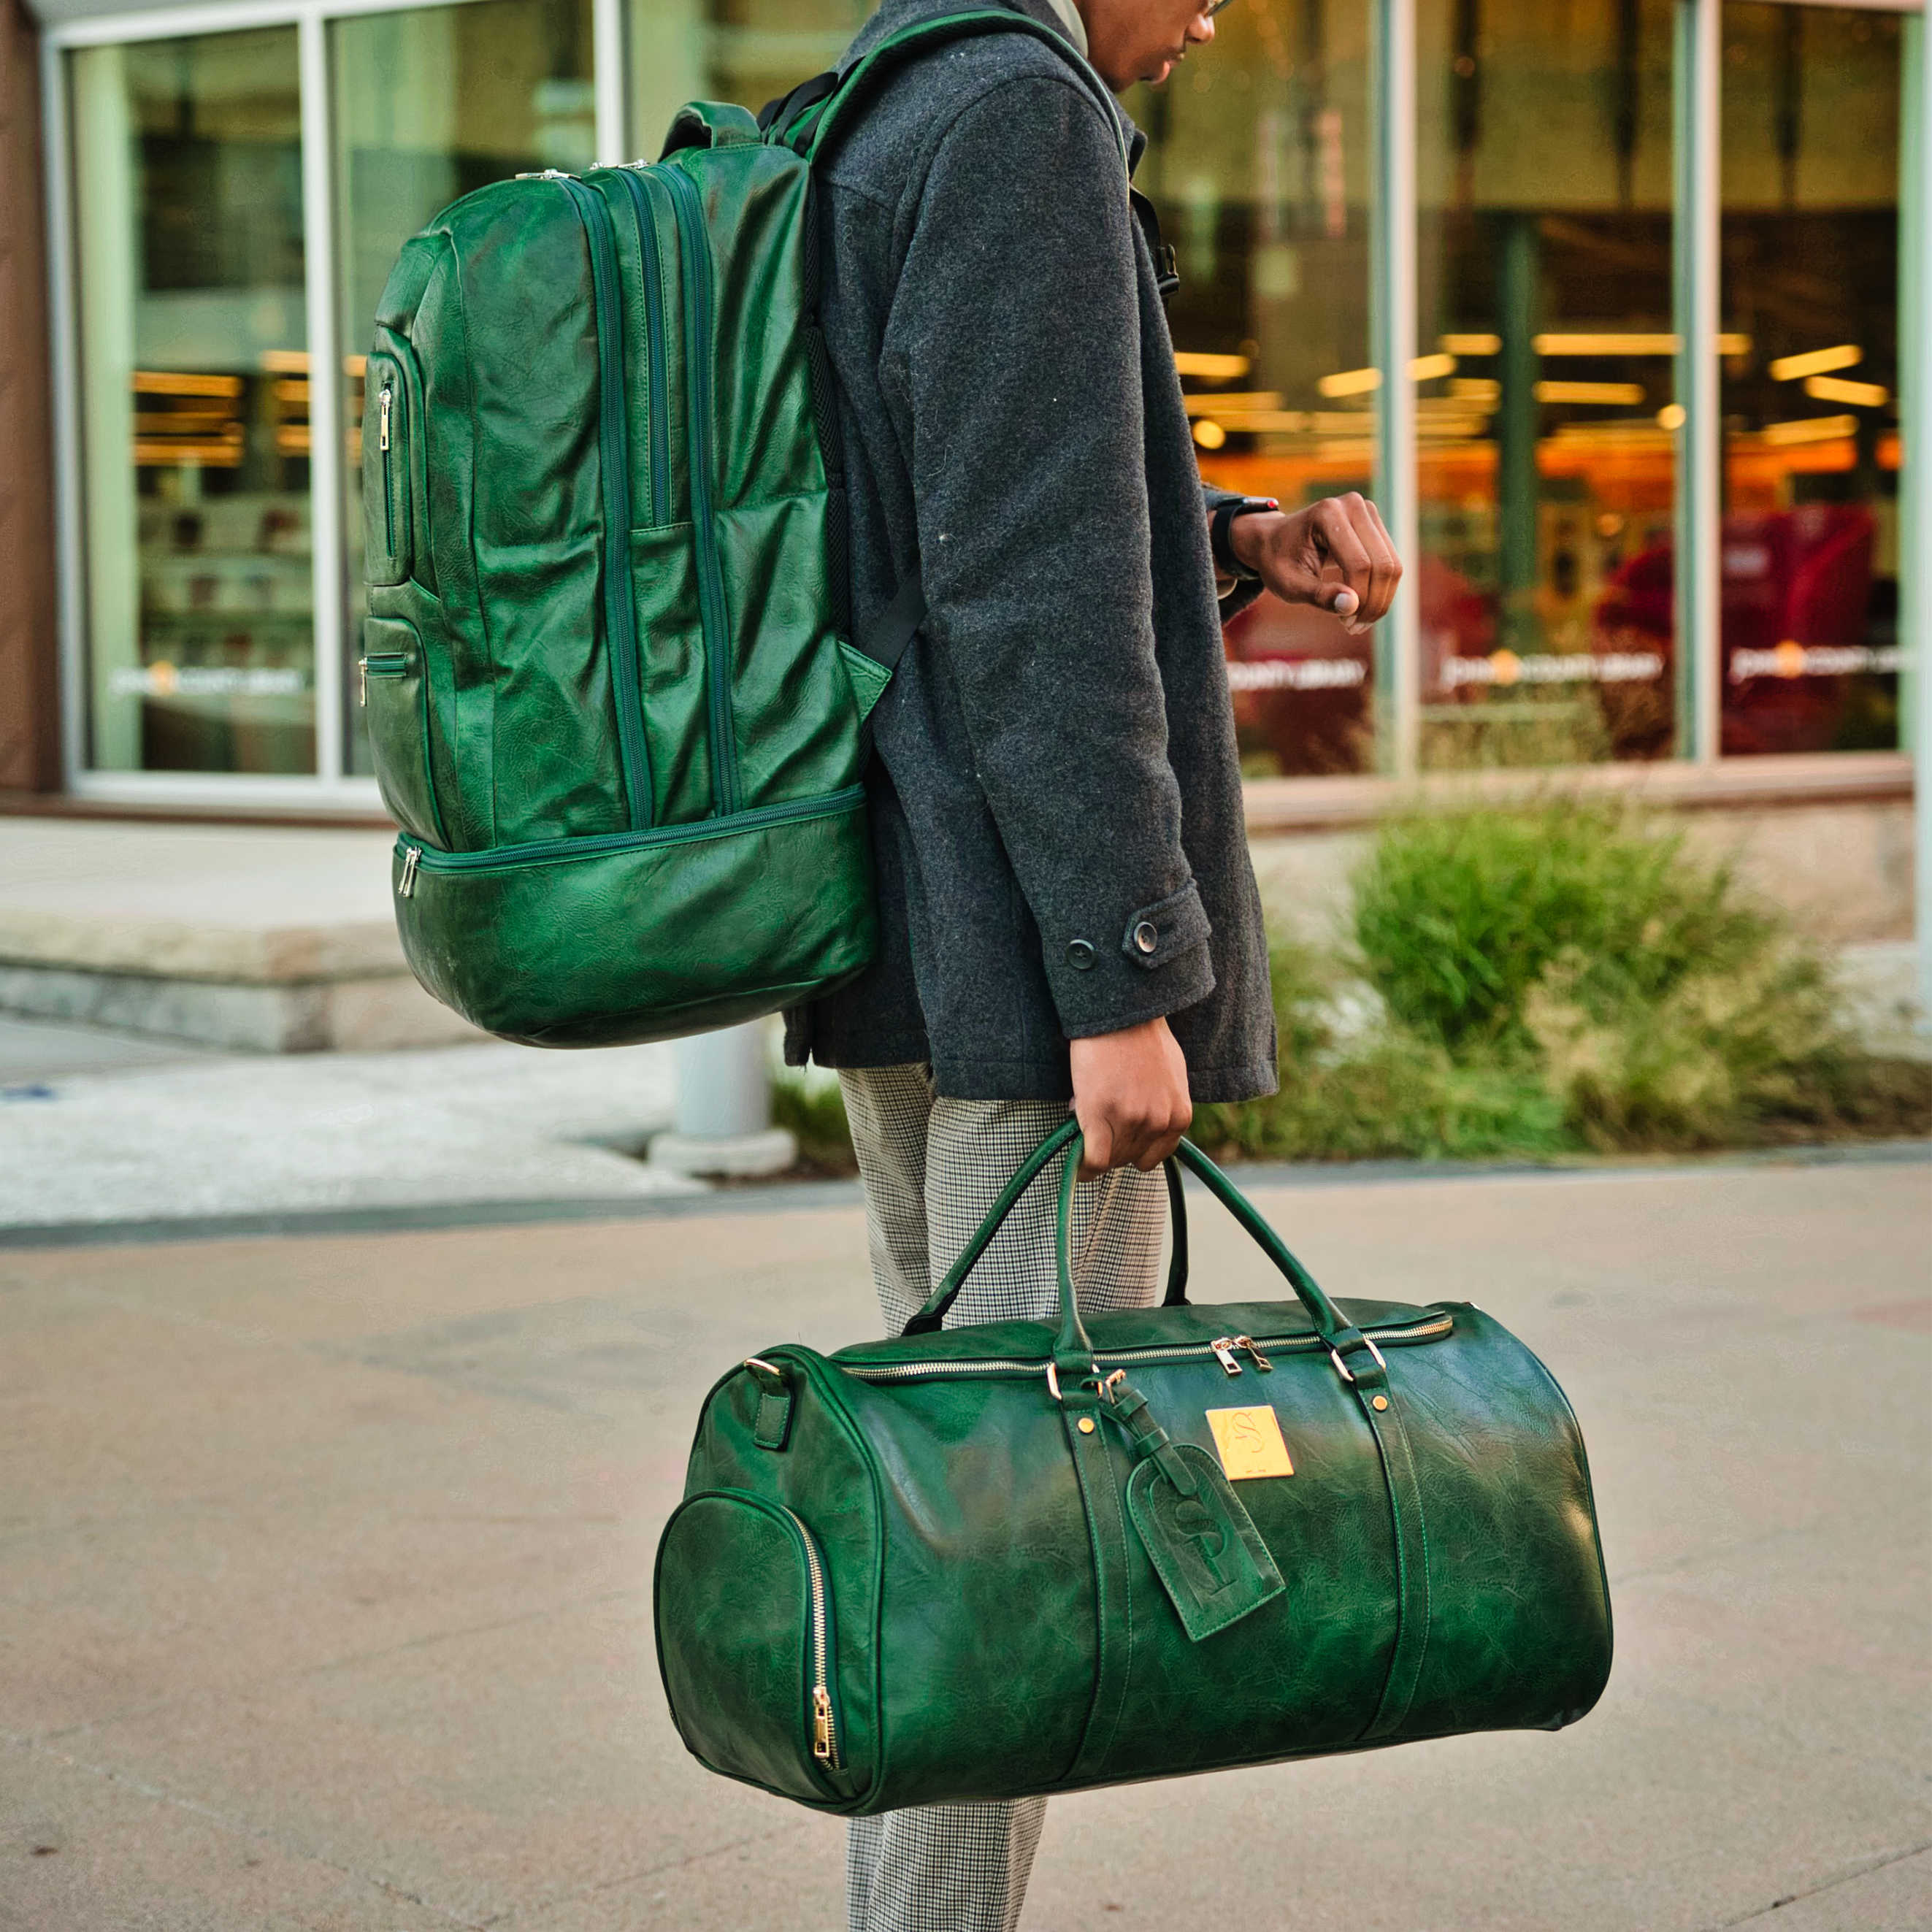 Emerald Green Luciano Leather 3 Bag Set - Sole Premise